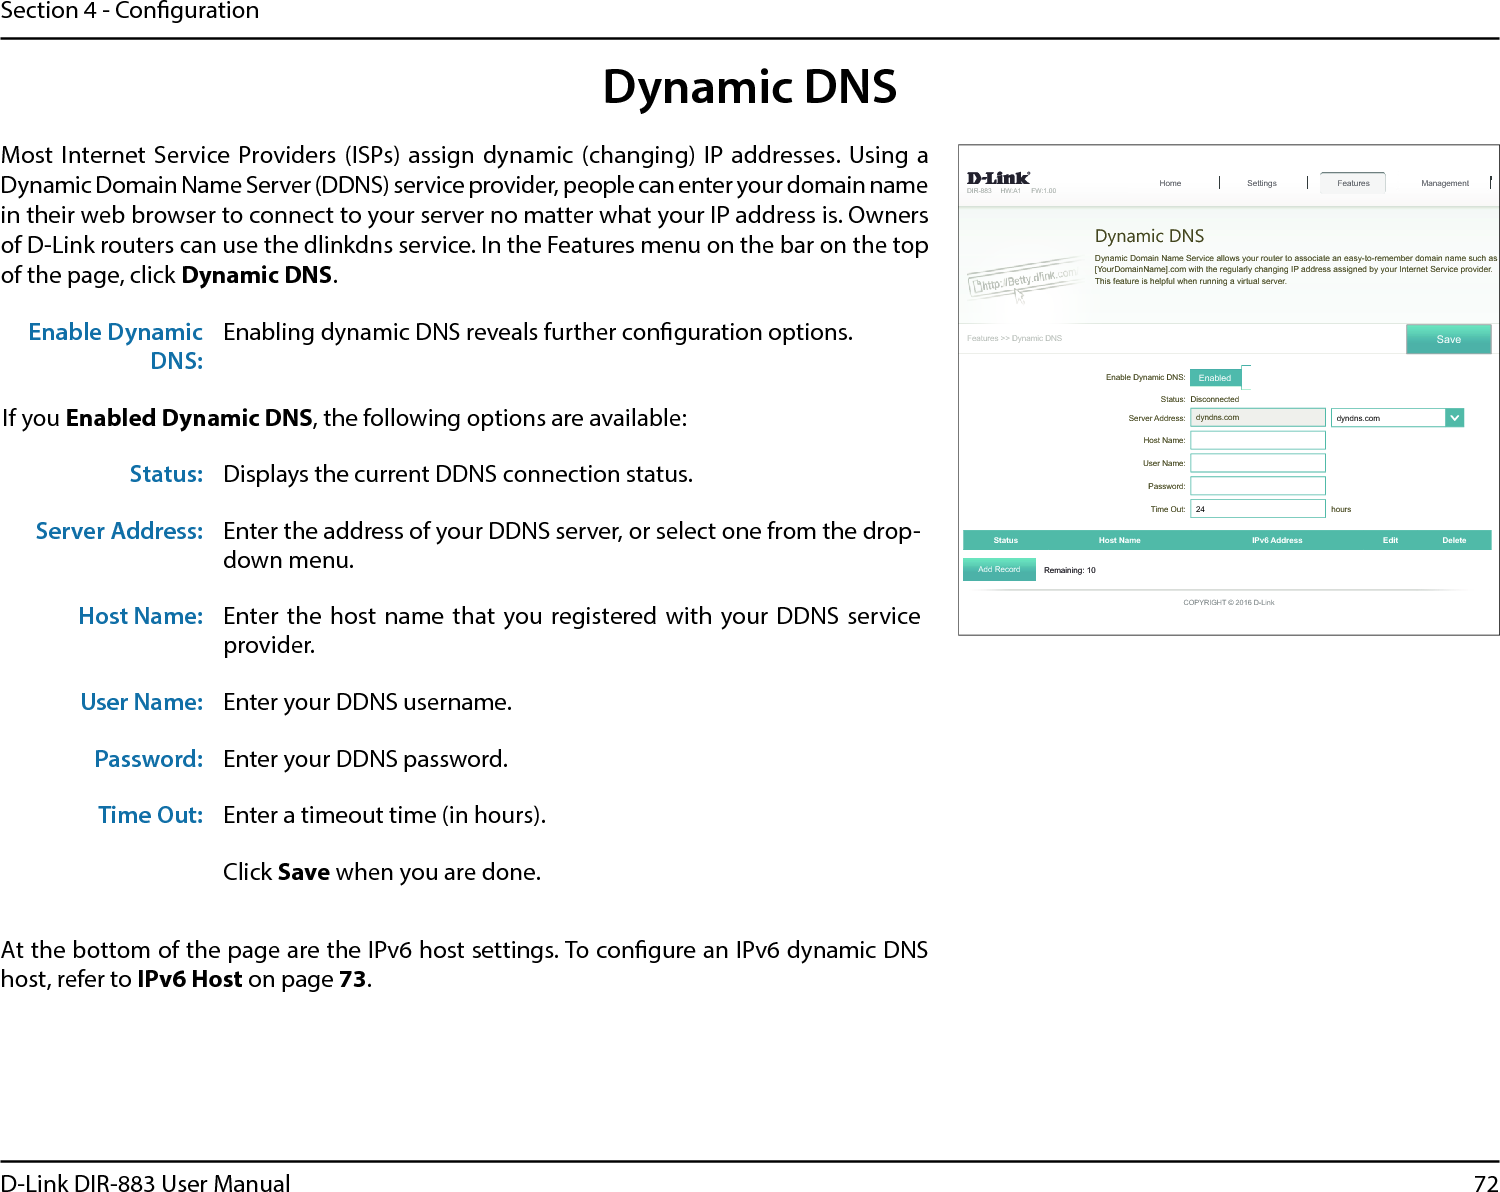 72D-Link DIR-883 User ManualSection 4 - Conguration&apos;,5 +:$ ):)HDWXUHV!!&apos;\QDPLF&apos;16Dynamic DNS&apos;\QDPLF&apos;RPDLQ1DPH6HUYLFHDOORZV\RXUURXWHUWRDVVRFLDWHDQHDV\WRUHPHPEHUGRPDLQQDPHVXFKDV&gt;&lt;RXU&apos;RPDLQ1DPH@FRPZLWKWKHUHJXODUO\FKDQJLQJ,3DGGUHVVDVVLJQHGE\\RXU,QWHUQHW6HUYLFHSURYLGHUThis feature is helpful when running a virtual server.6HWWLQJV Features+RPH Management6DYH(QDEOH&apos;\QDPLF&apos;16 Enabled6WDWXV &apos;LVFRQQHFWHG6HUYHU$GGUHVV dyndns.com dyndns.com໹+RVW1DPHUser Name:Password:Time Out:  hoursStatus +RVW1DPH ,3Y$GGUHVV (GLW Delete5HPDLQLQJ$GG5HFRUG&amp;23&lt;5,*+7&apos;/LQNDynamic DNSMost Internet  Service Providers (ISPs) assign dynamic (changing) IP addresses. Using a Dynamic Domain Name Server (DDNS) service provider, people can enter your domain name in their web browser to connect to your server no matter what your IP address is. Owners of D-Link routers can use the dlinkdns service. In the Features menu on the bar on the top of the page, click Dynamic DNS.At the bottom of the page are the IPv6 host settings. To congure an IPv6 dynamic DNS host, refer to IPv6 Host on page 73.Enable Dynamic DNS:Enabling dynamic DNS reveals further conguration options.If you Enabled Dynamic DNS, the following options are available:Status: Displays the current DDNS connection status.Server Address: Enter the address of your DDNS server, or select one from the drop-down menu.Host Name: Enter the host name that you registered with your DDNS  service provider.User Name: Enter your DDNS username.Password: Enter your DDNS password.Time Out: Enter a timeout time (in hours).Click Save when you are done.